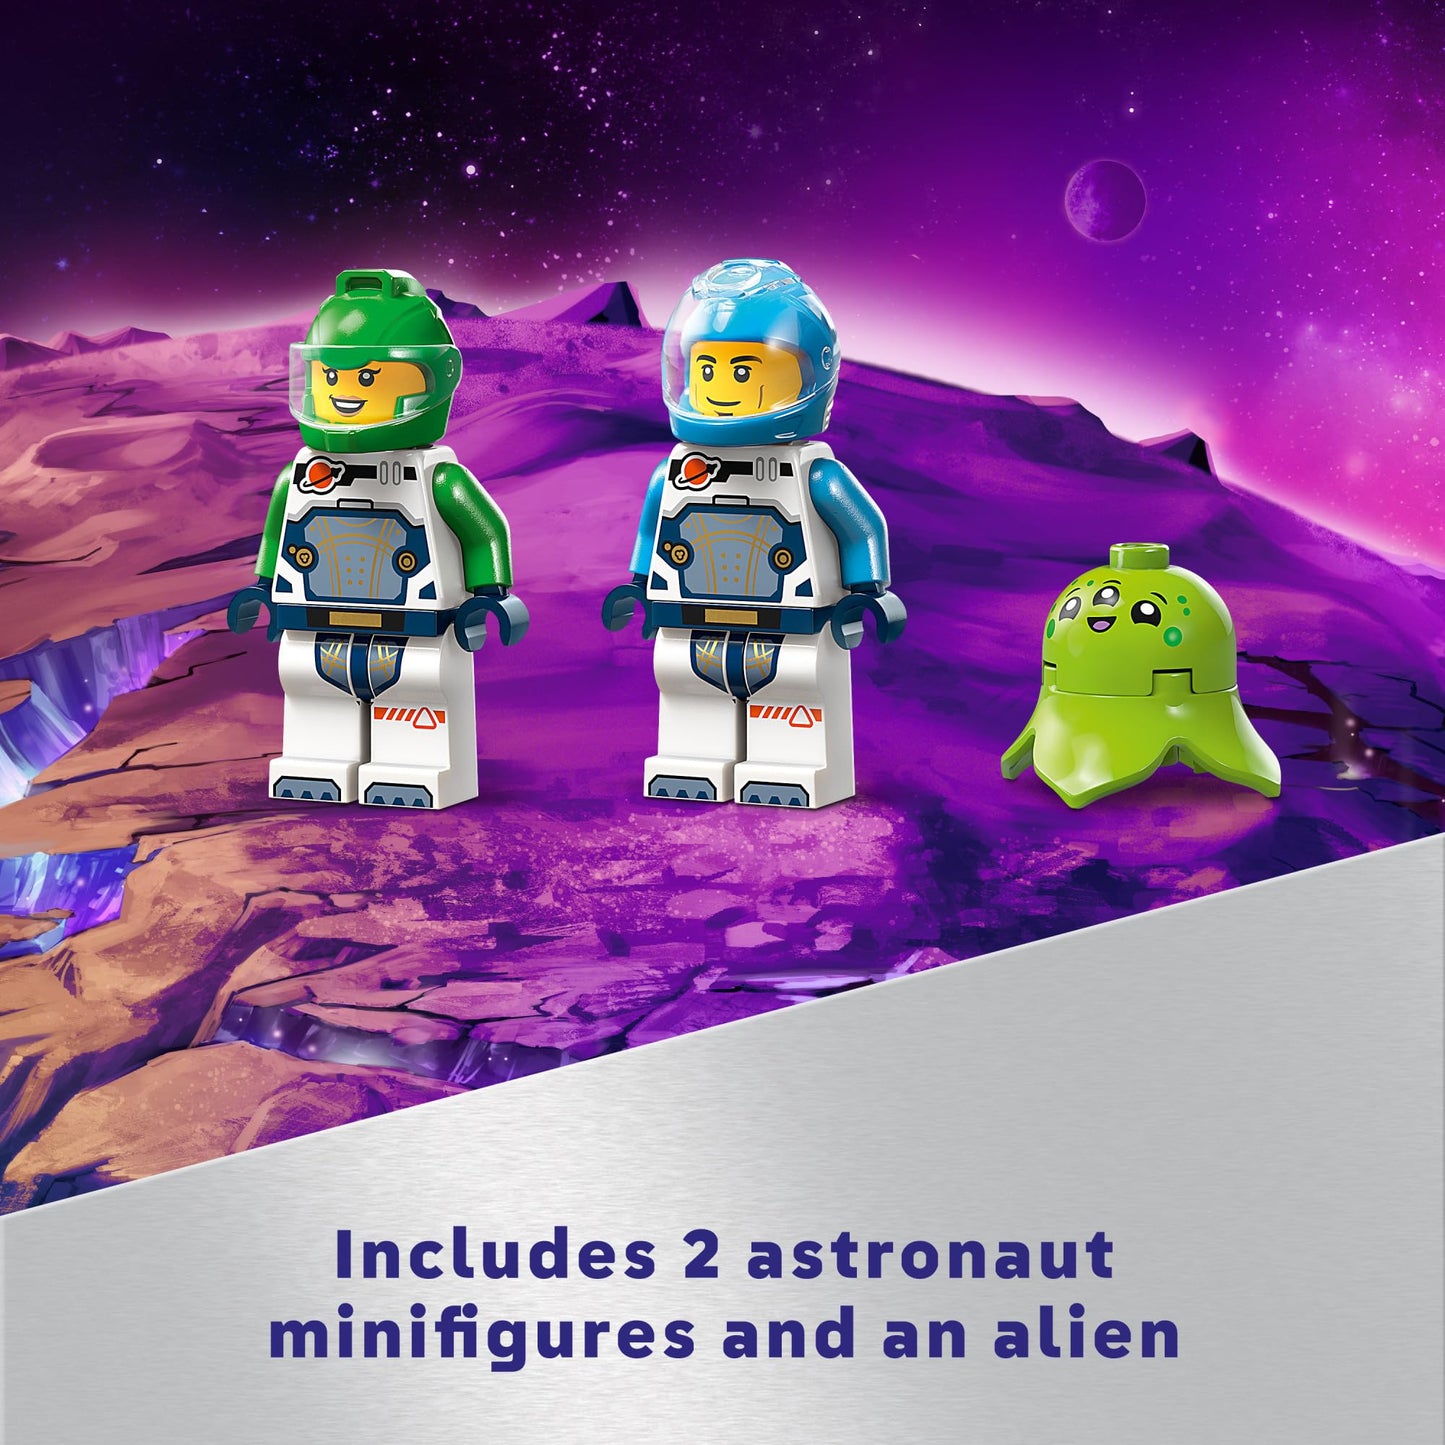 LEGO City Spaceship and Asteroid Discovery Toy Building Set, Gift for Kids Ages 4 Years Old and Up who Love Pretend Play, Includes 2 Space Crew Minifigures, Alien, Crystals, and Crane Toy, 60429